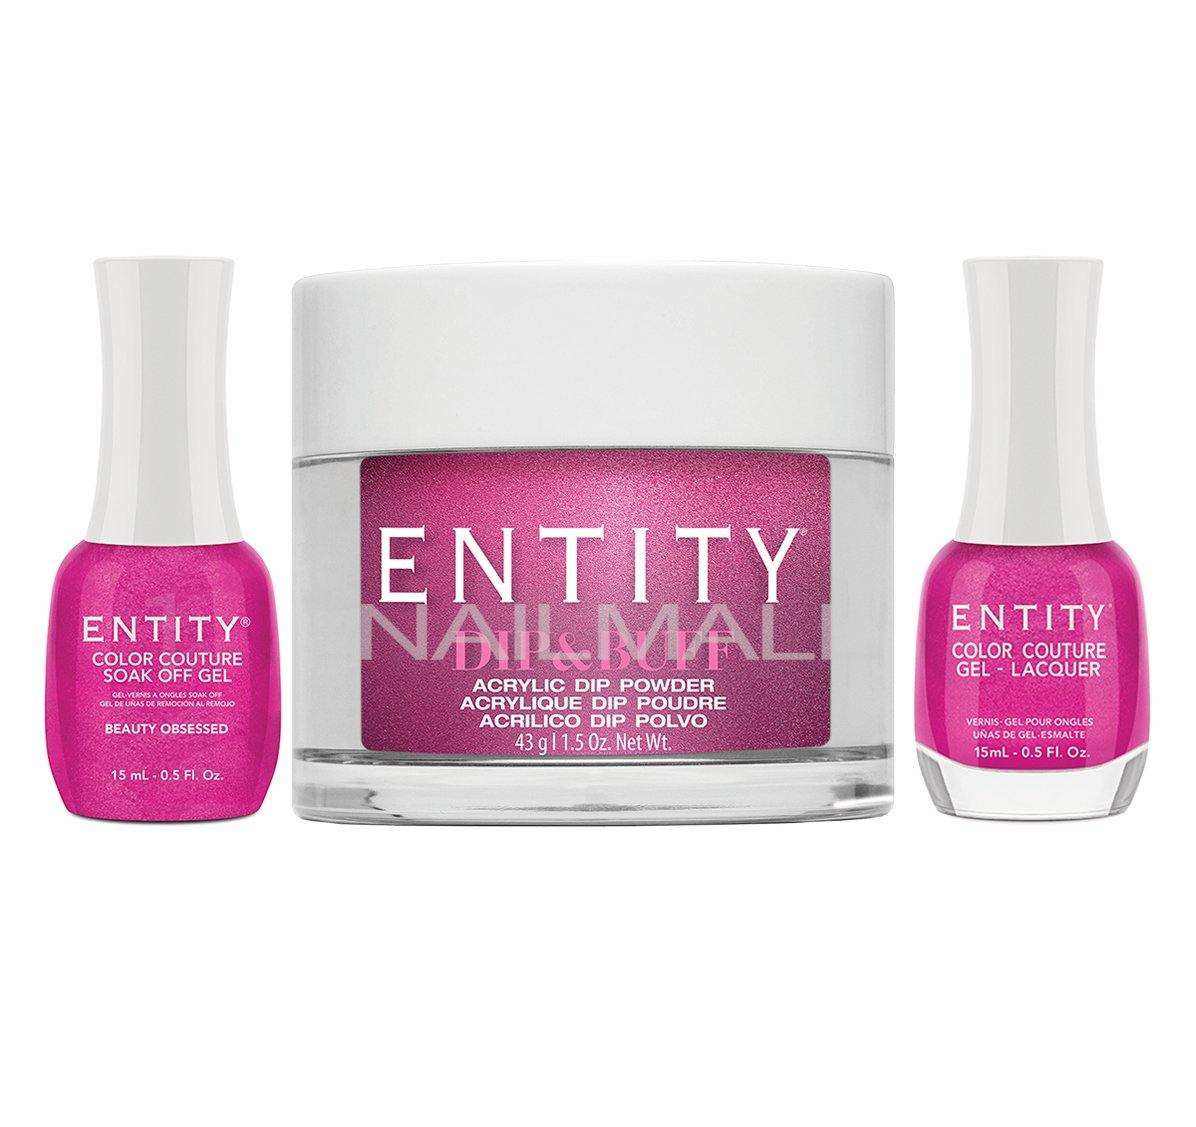 Entity Trio - Gel, Lacquer, & Dip Combo - BEAUTY OBSESSED - 5401853